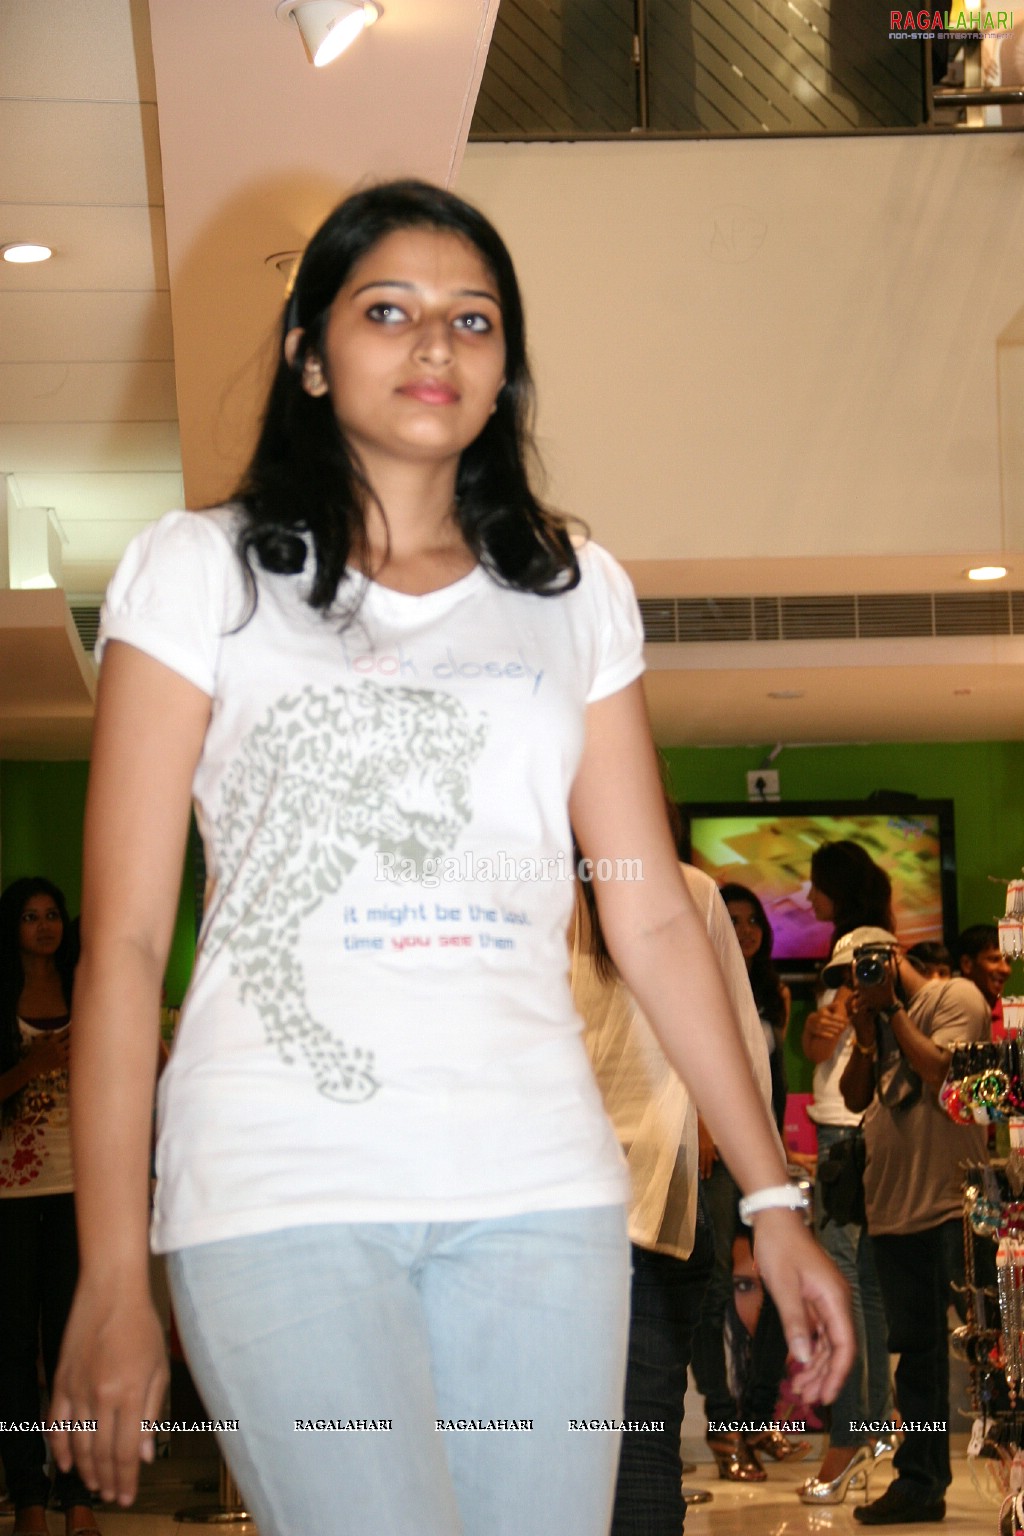 Femina Miss India South 2011 Auditions